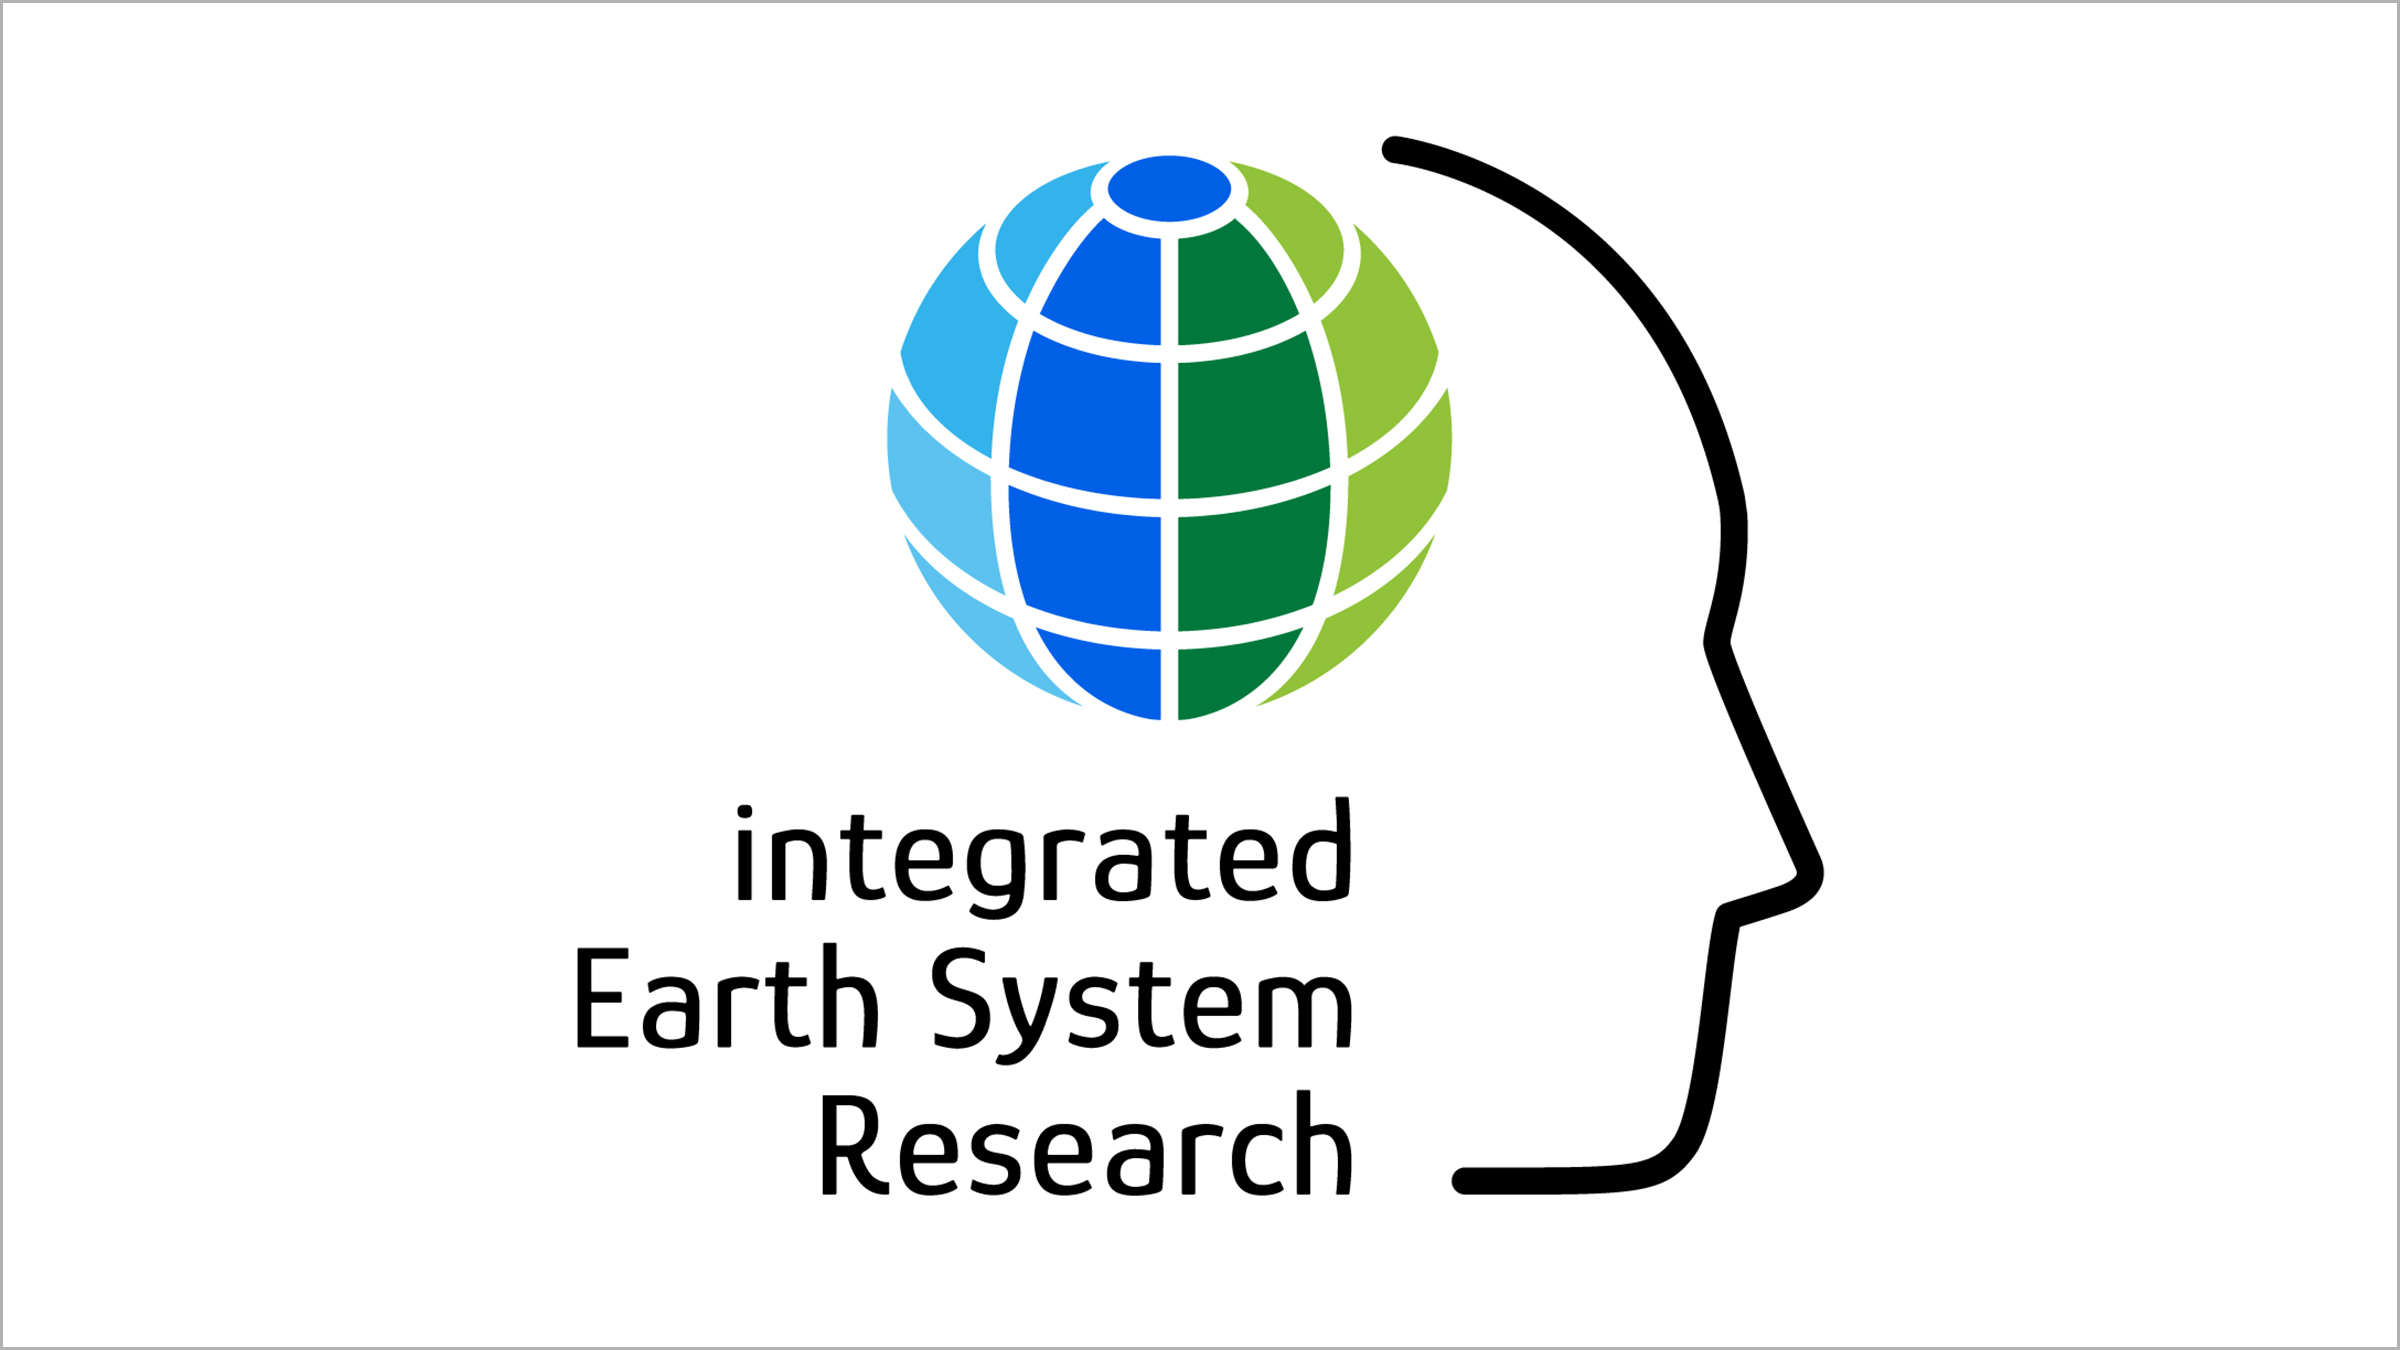 Leibniz Research Network "Integrated Earth System Research" (iESF)